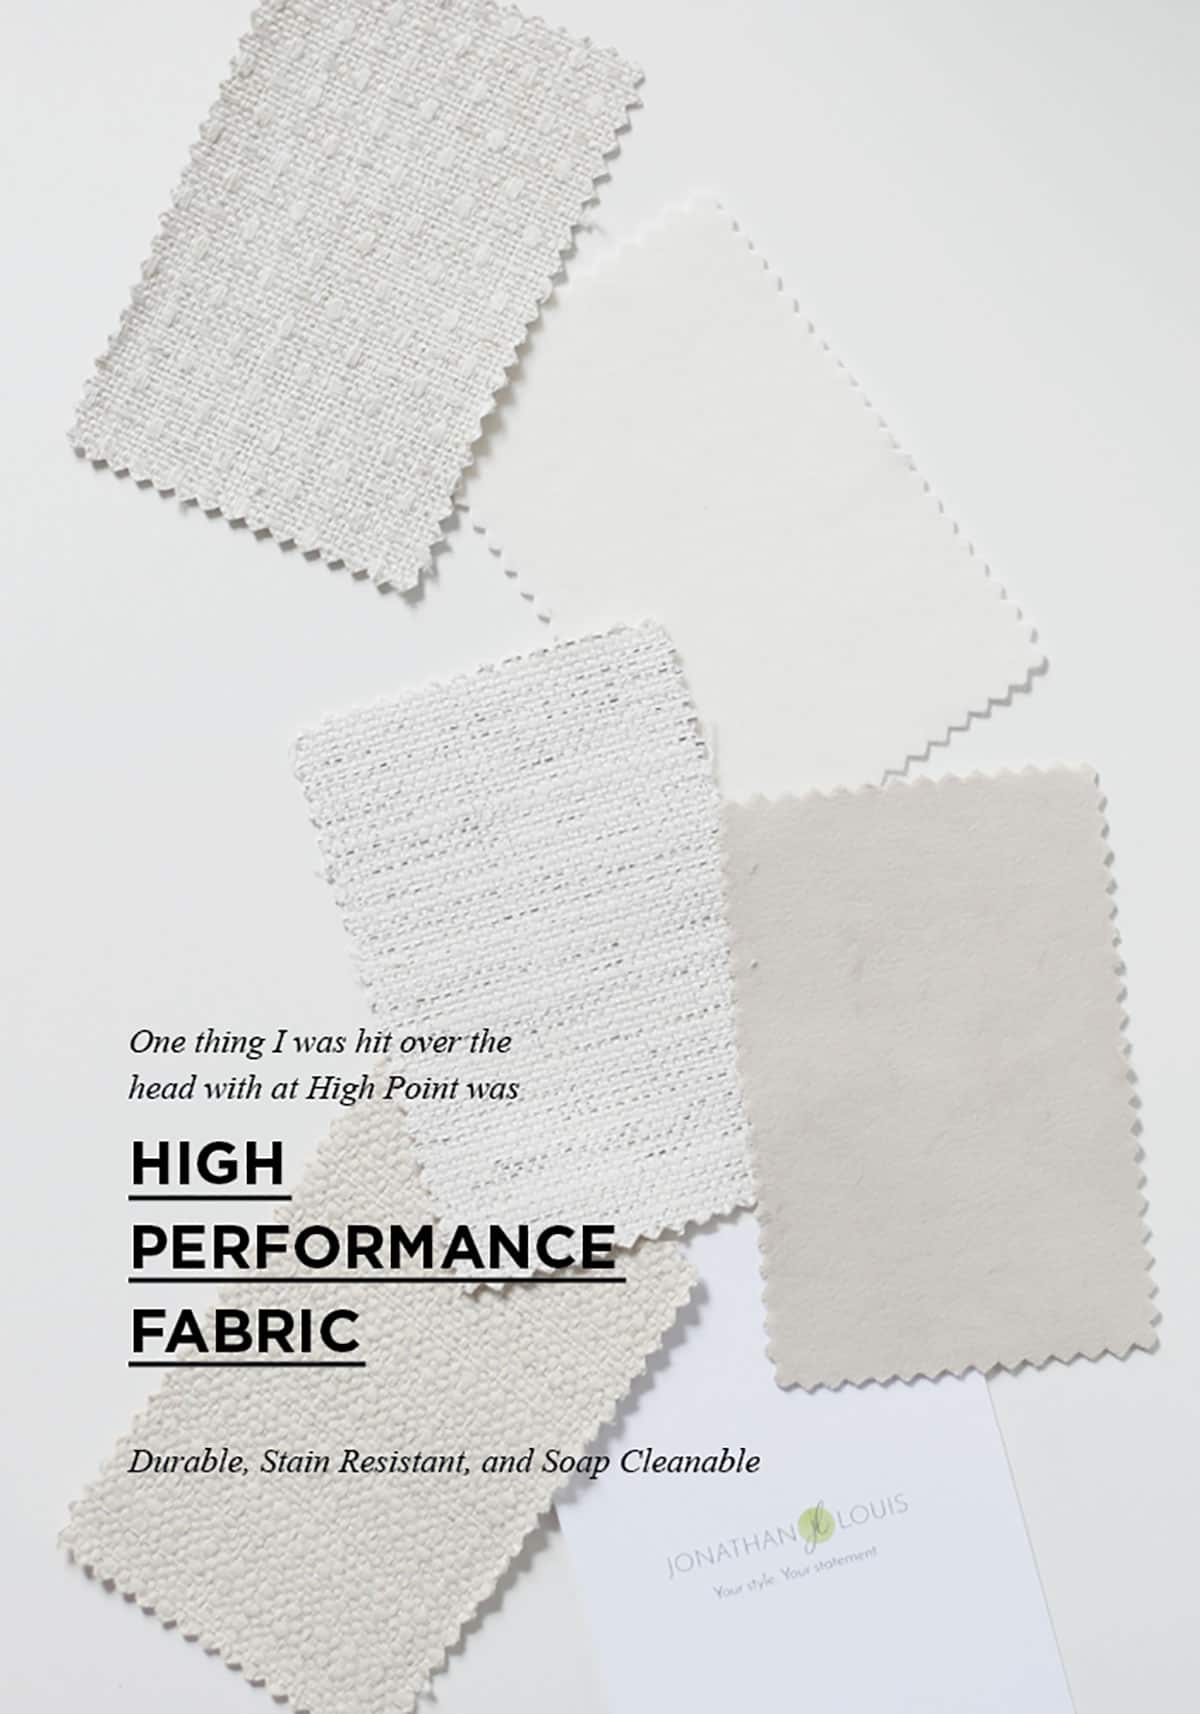 I bought high-performance fabric so I can easily clean it